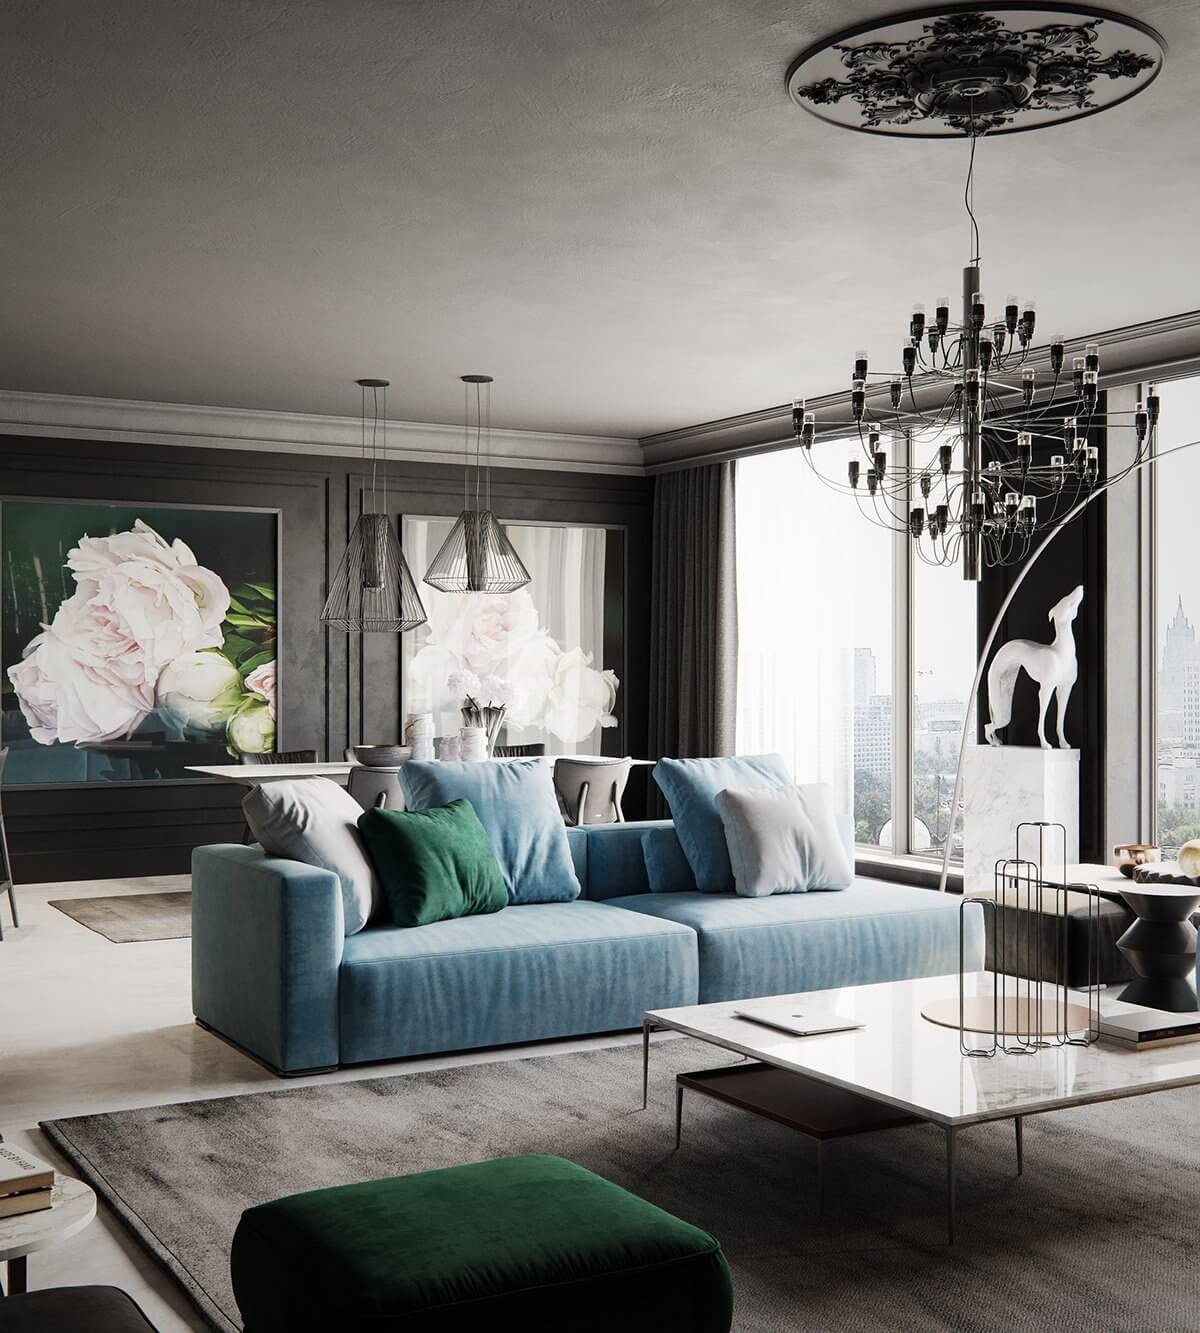 Moscow apartment living room couch - cgi visualization